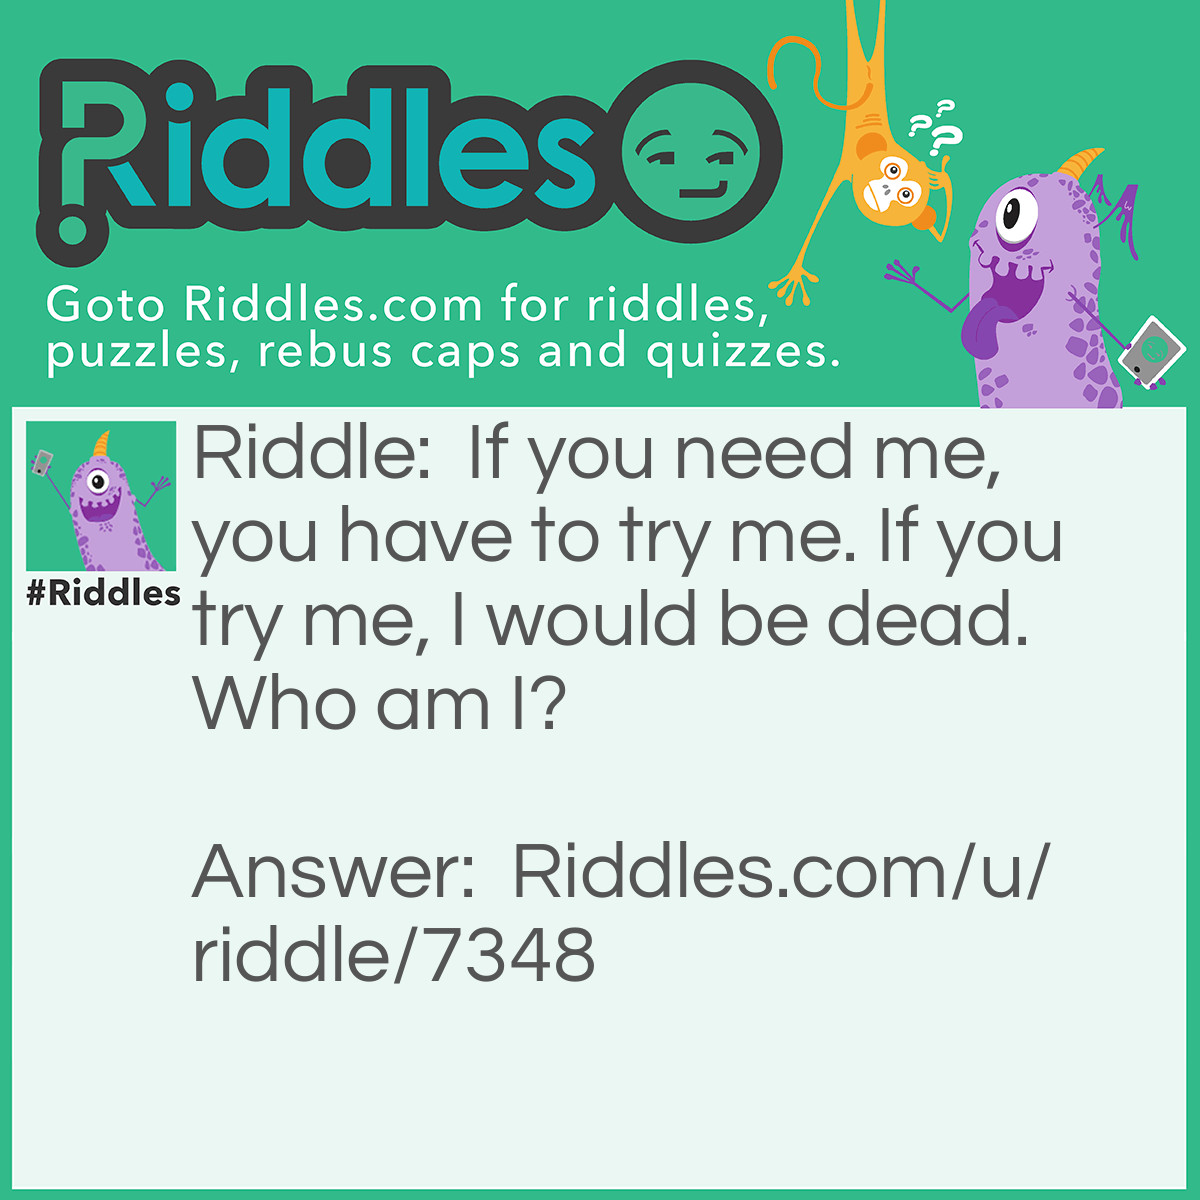 Riddle: If you need me, you have to try me. If you try me, I would be dead. Who am I? Answer: Match.